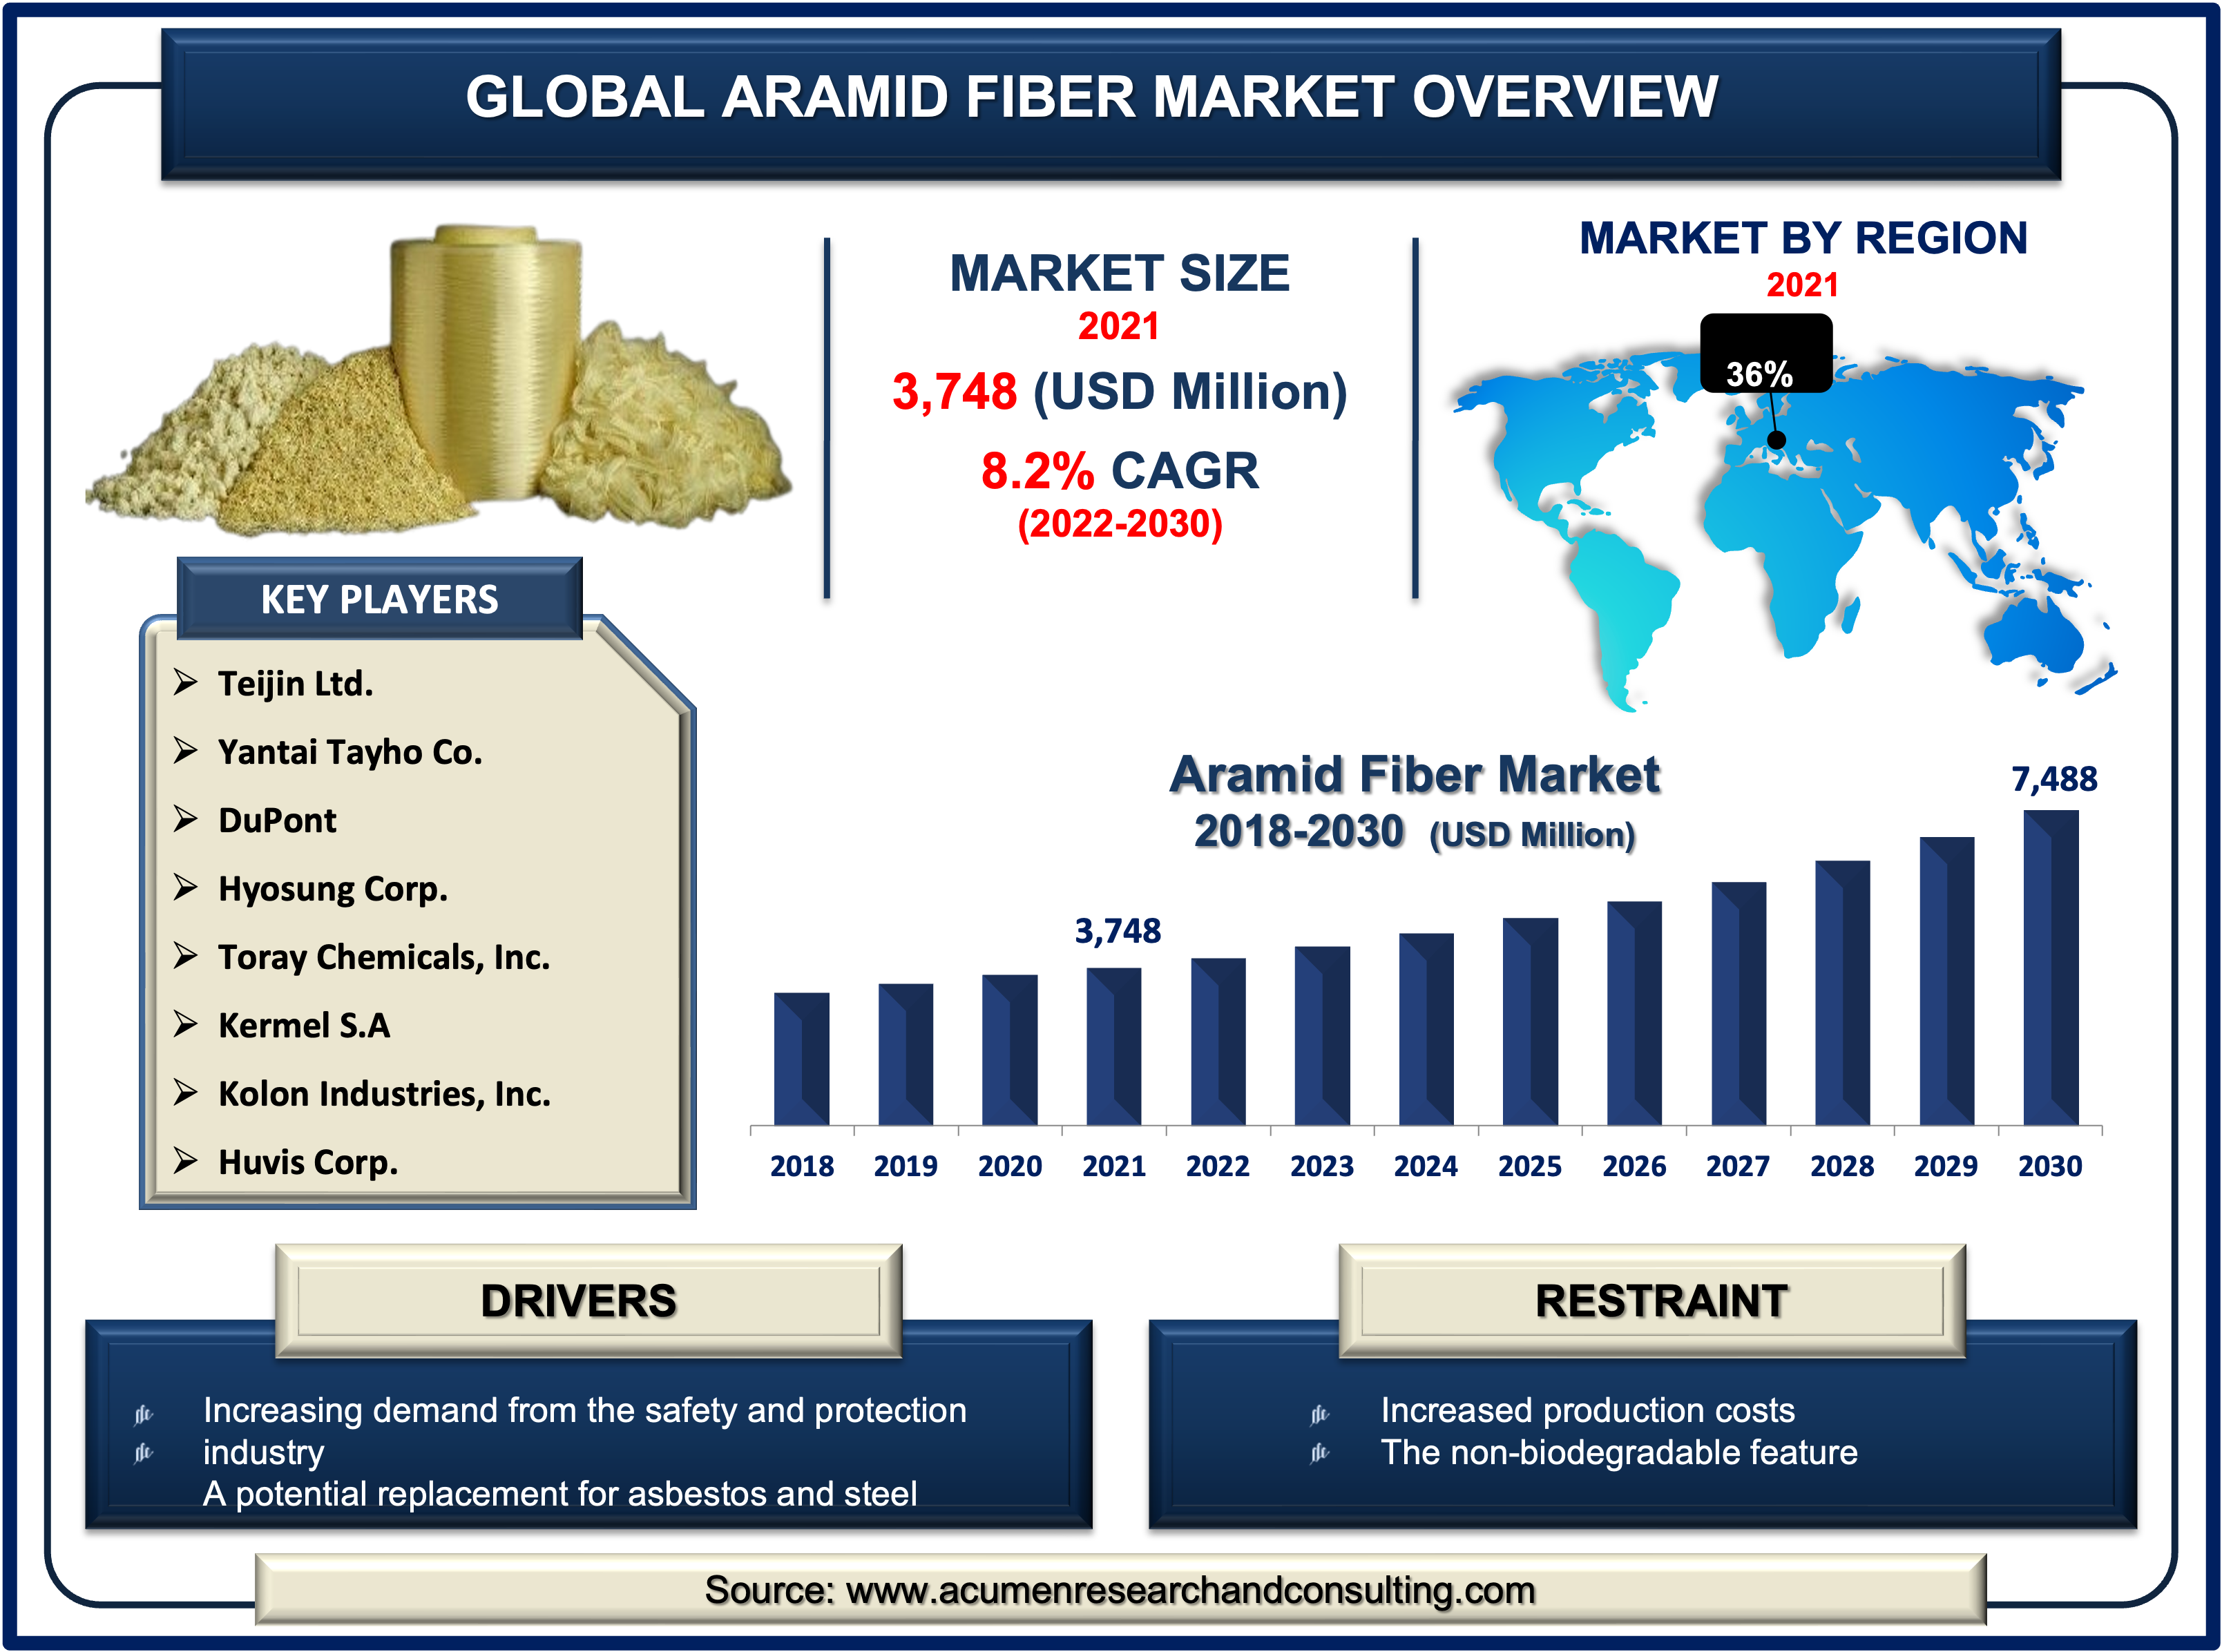 Aramid Fiber Market size accounted for USD 3,748 Million in 2021 and is expected to reach USD 7,488 Million by 2030 growing at a CAGR of 8.2% during the forecast period from 2022 to 2030.